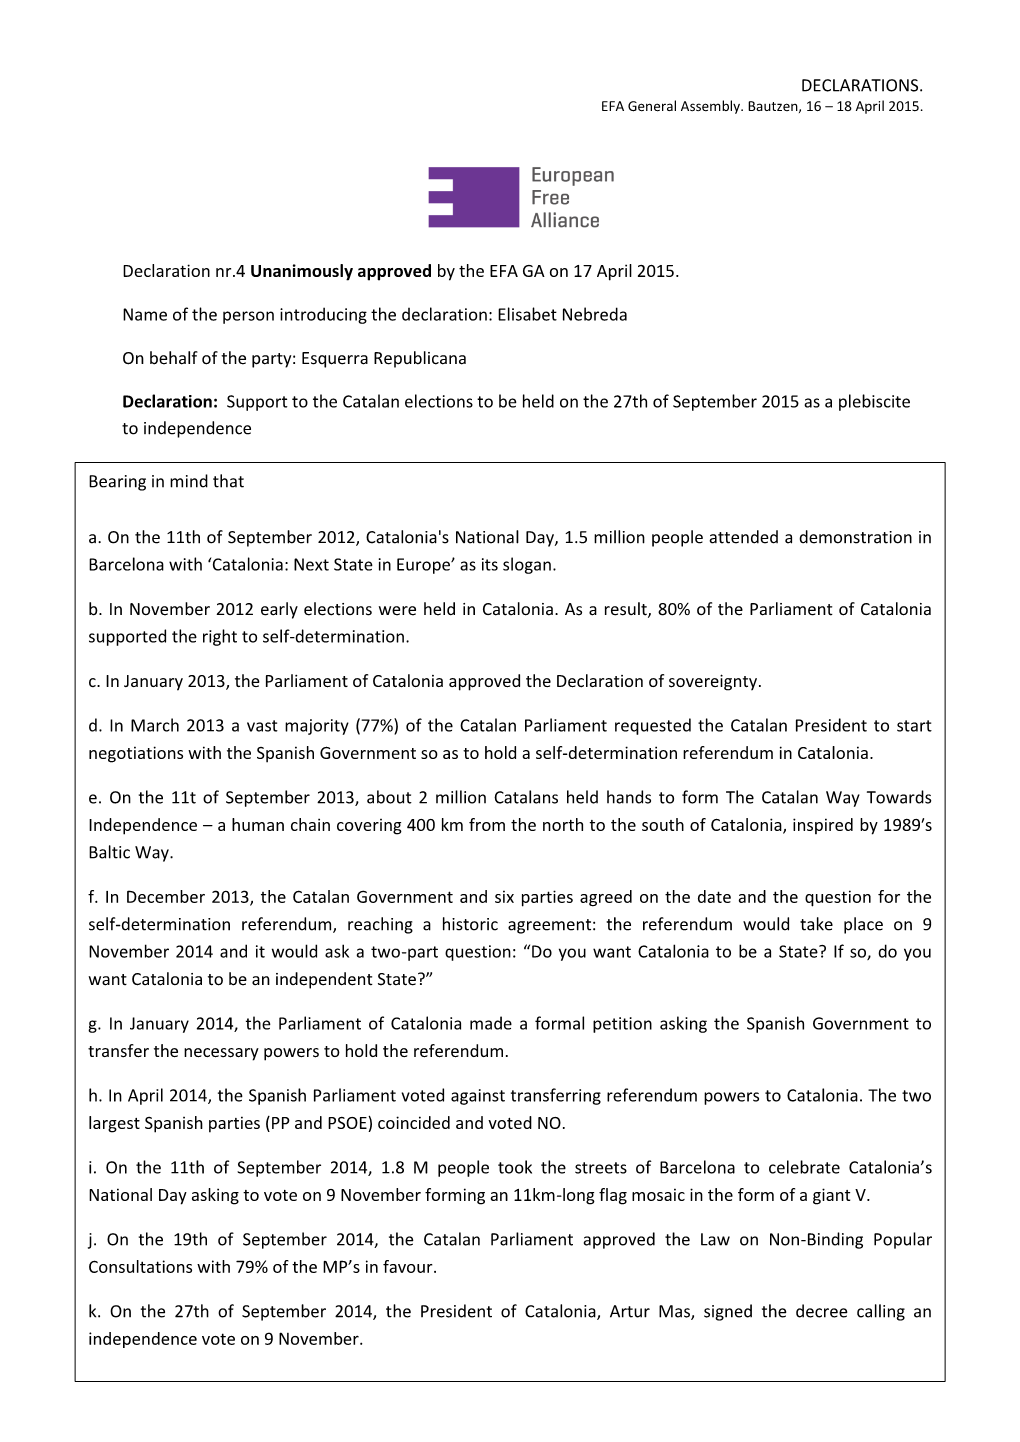 DECLARATIONS. Declaration Nr.4 Unanimously Approved by the EFA